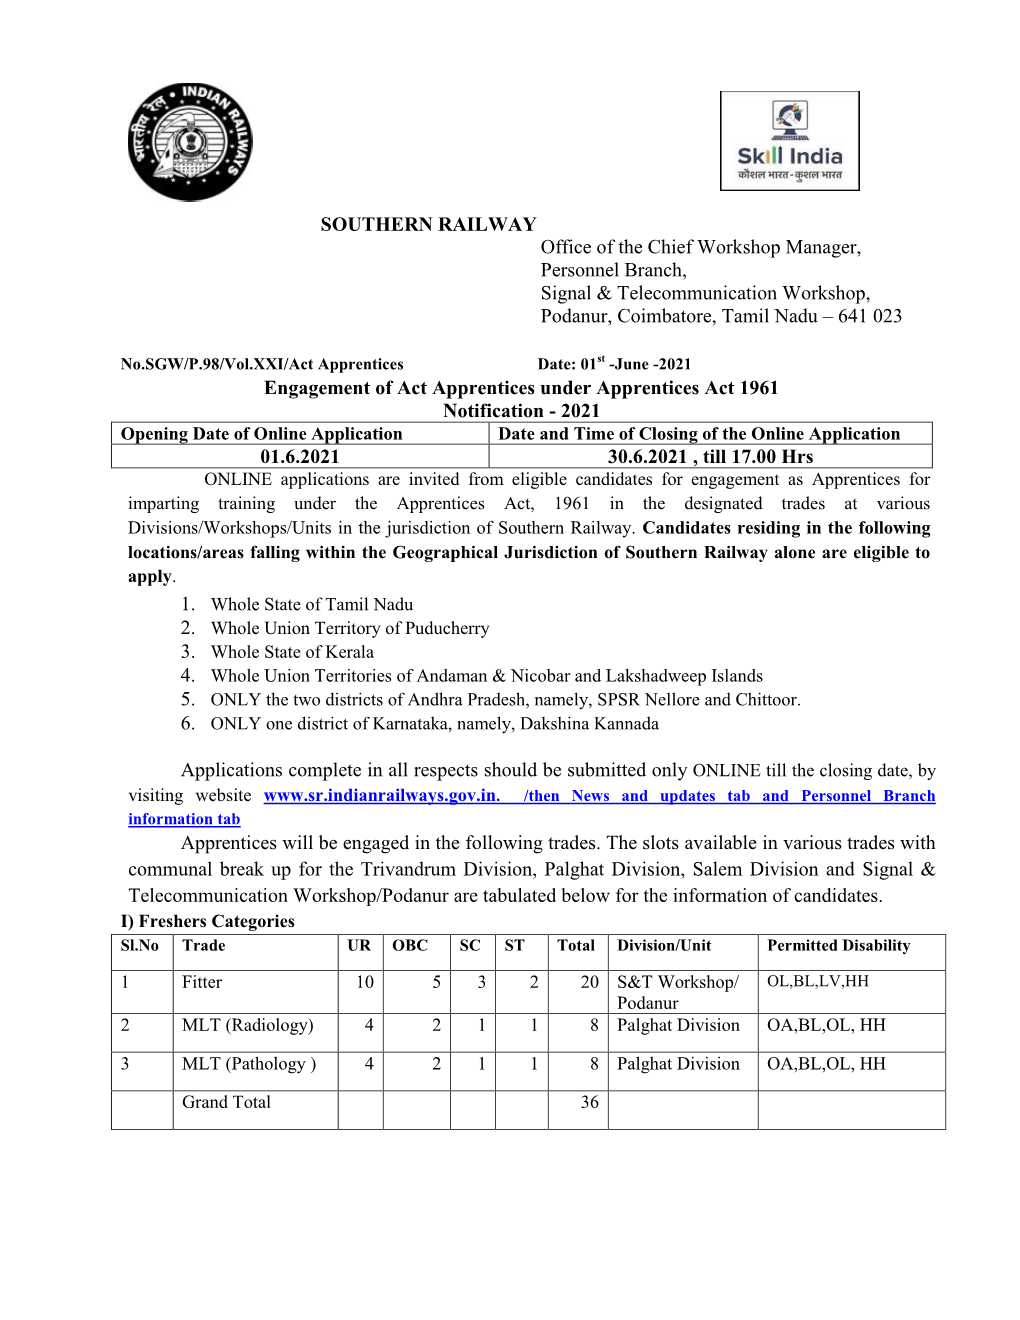 SOUTHERN RAILWAY Office of the Chief Workshop Manager, Personnel Branch, Signal & Telecommunication Workshop, Podanur, Coimbatore, Tamil Nadu – 641 023